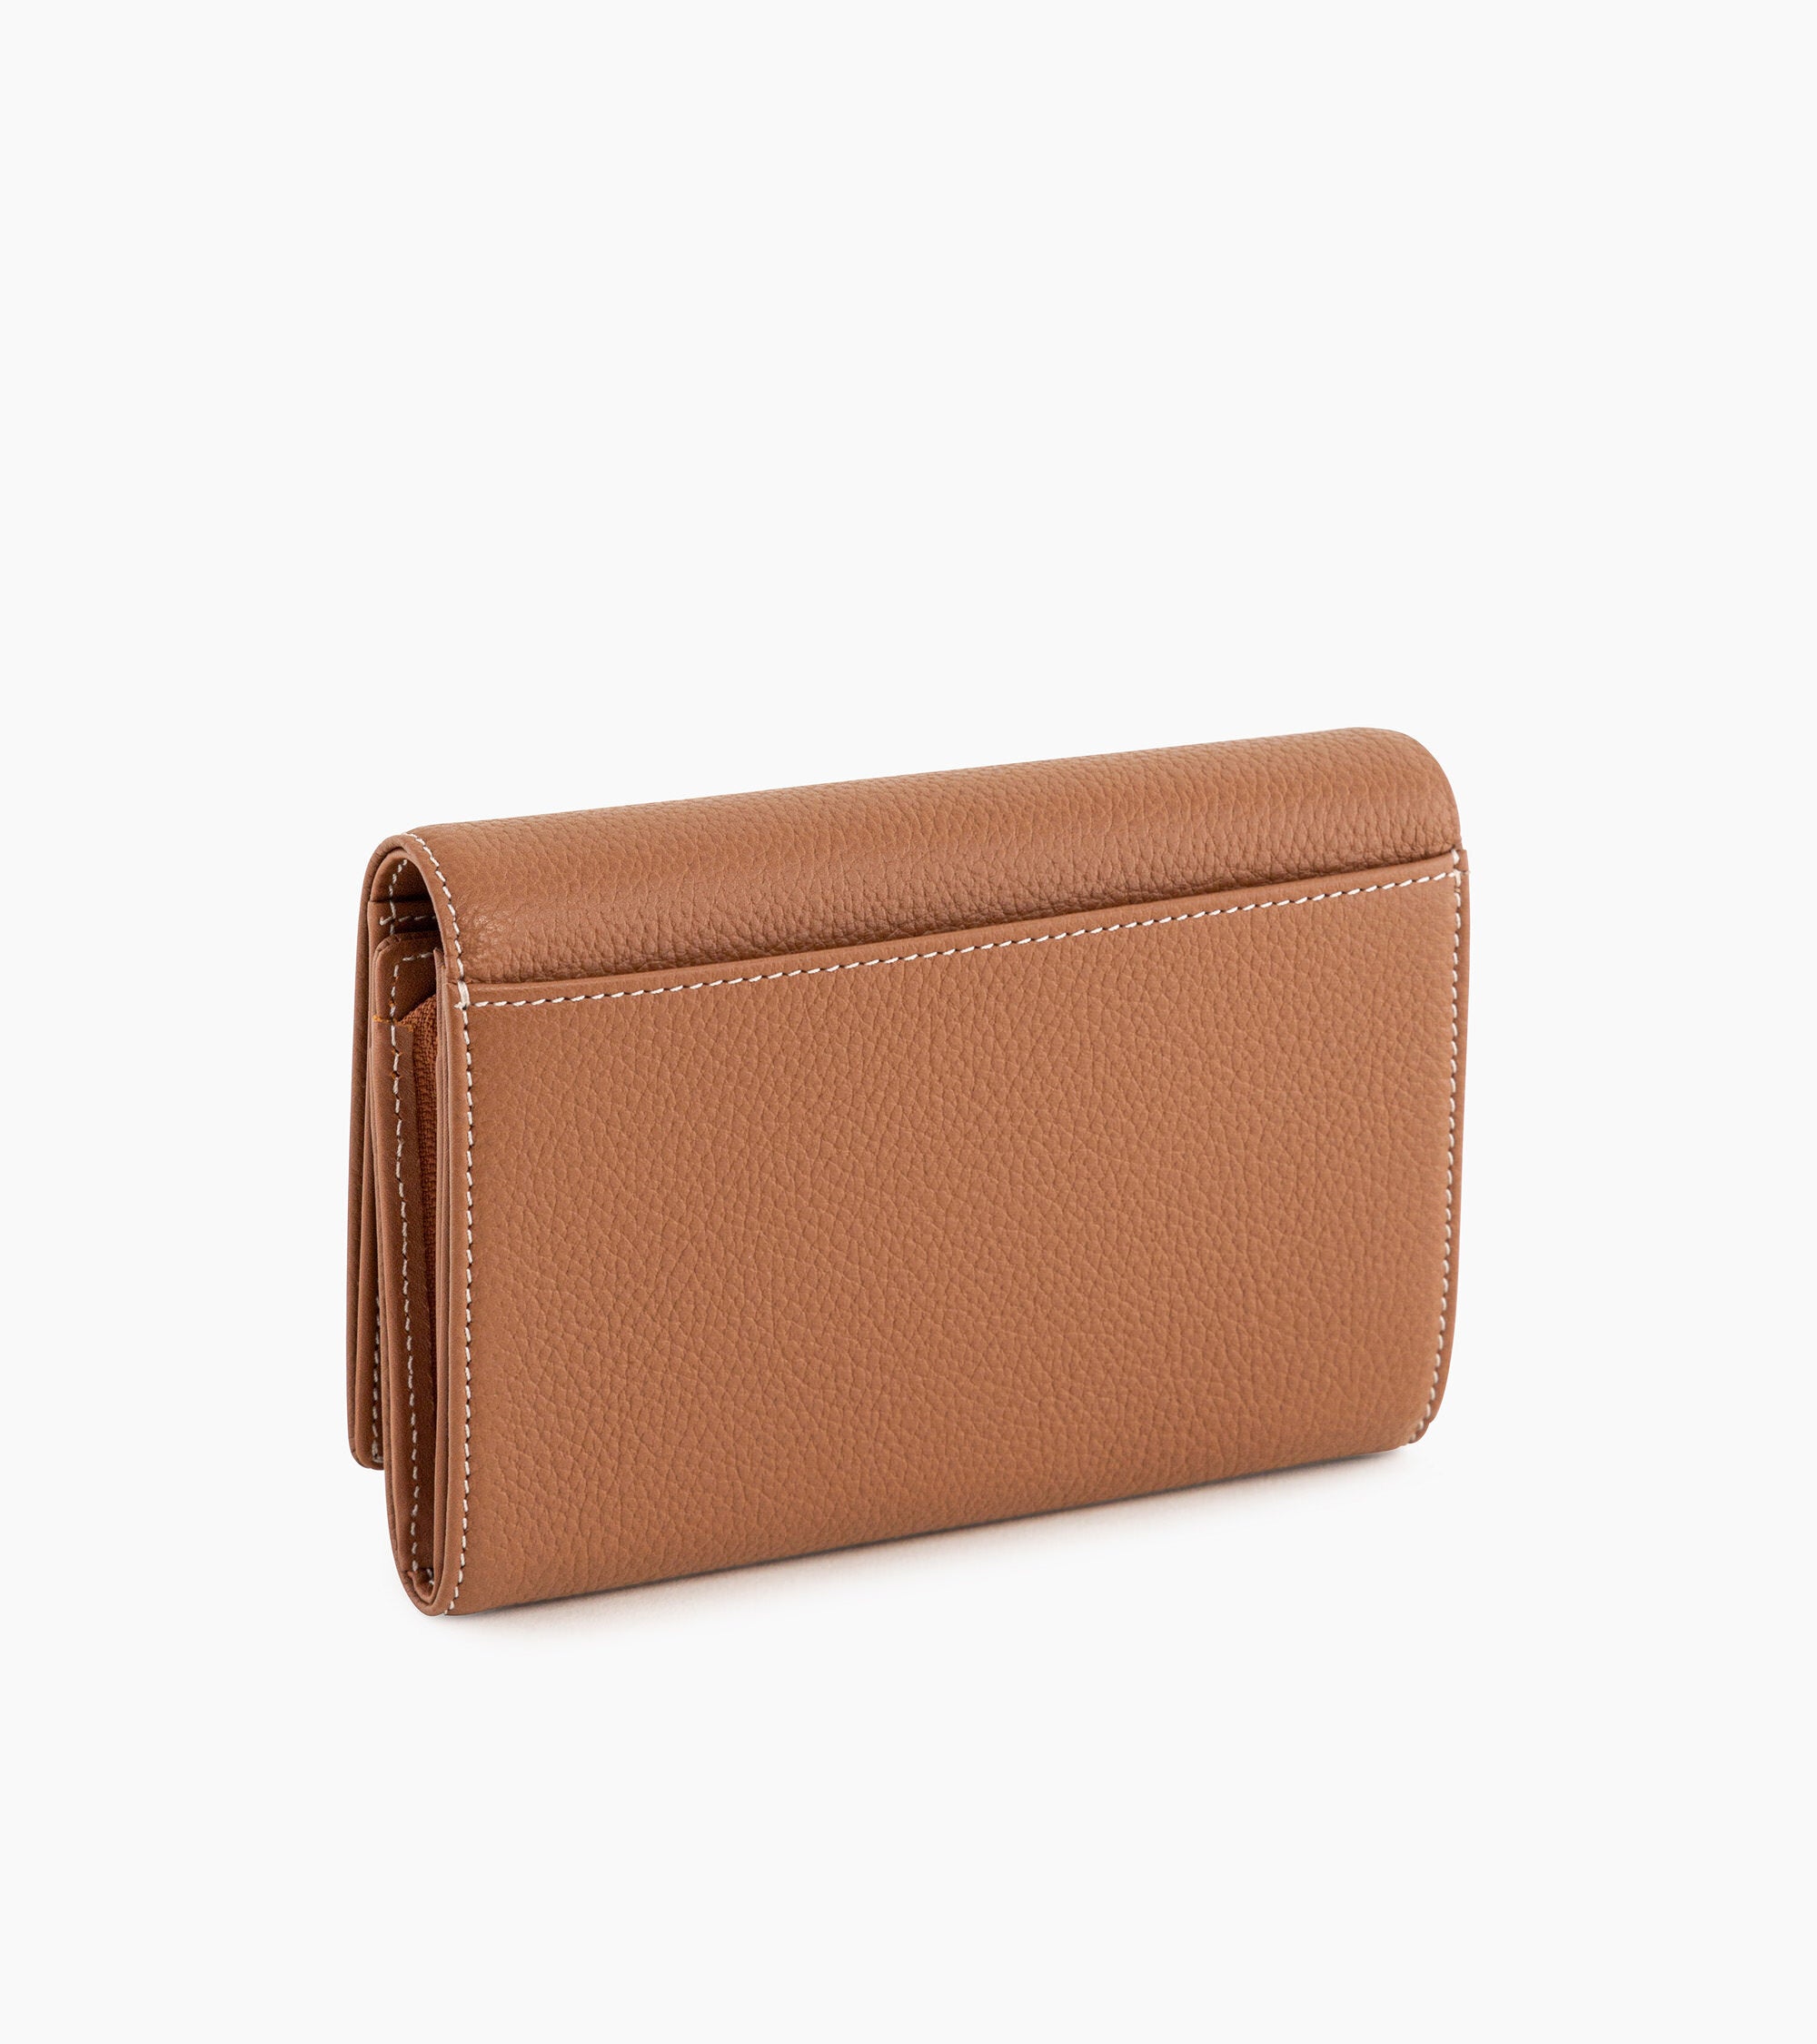 Emilie wallet in pebbled leather